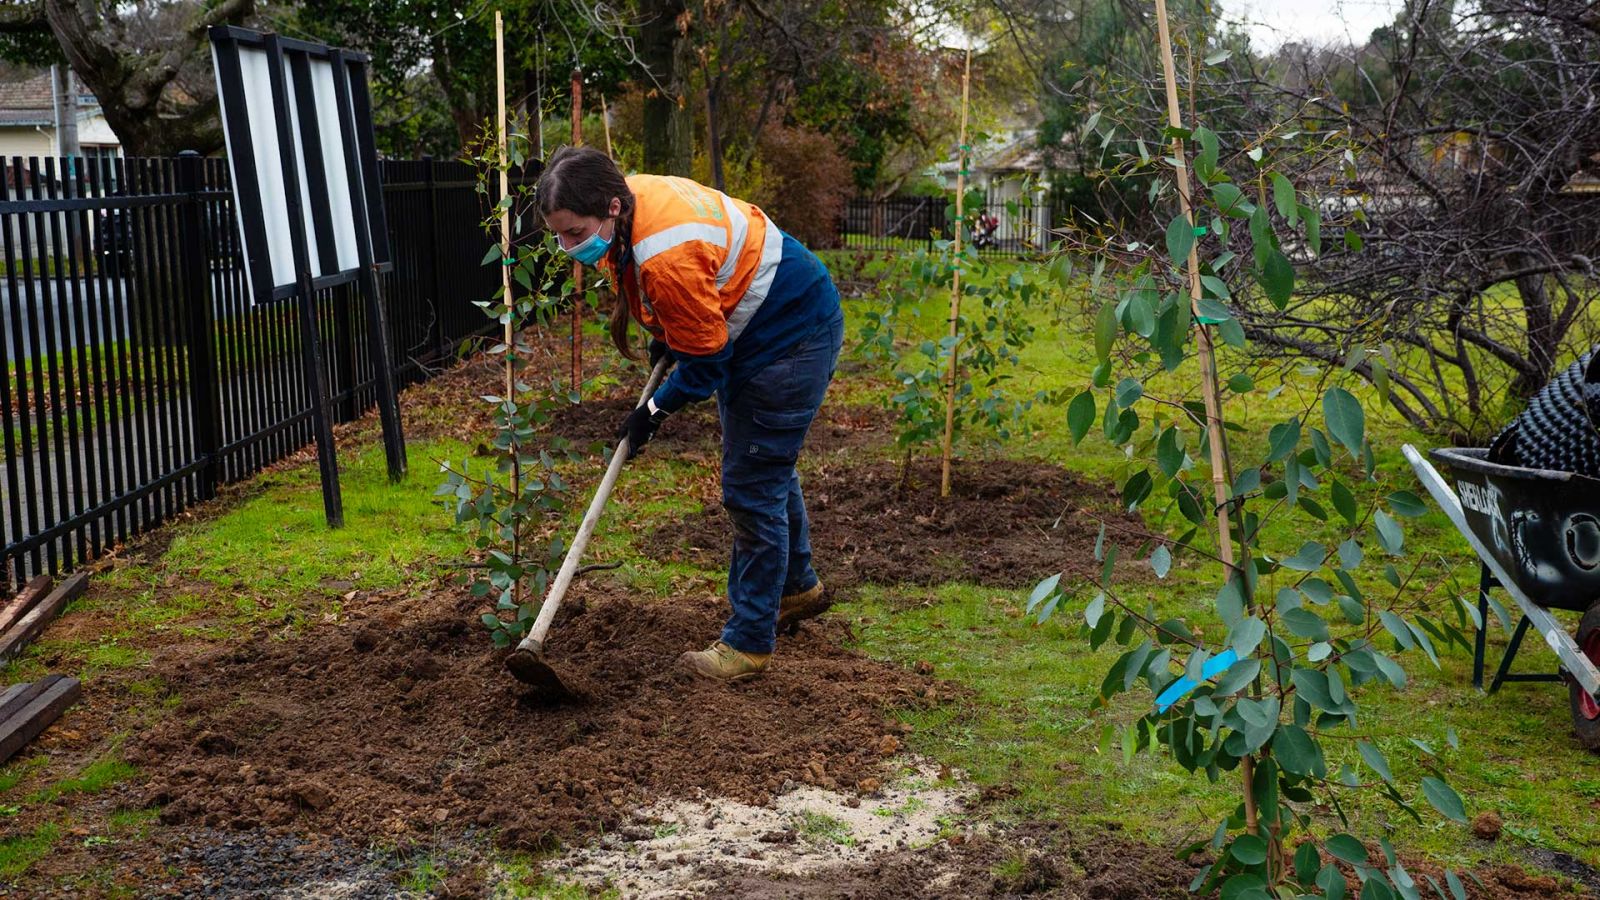 A gardener wearing protective clothing filling soil around a mature gum tree planted at Watsonia Primary School.